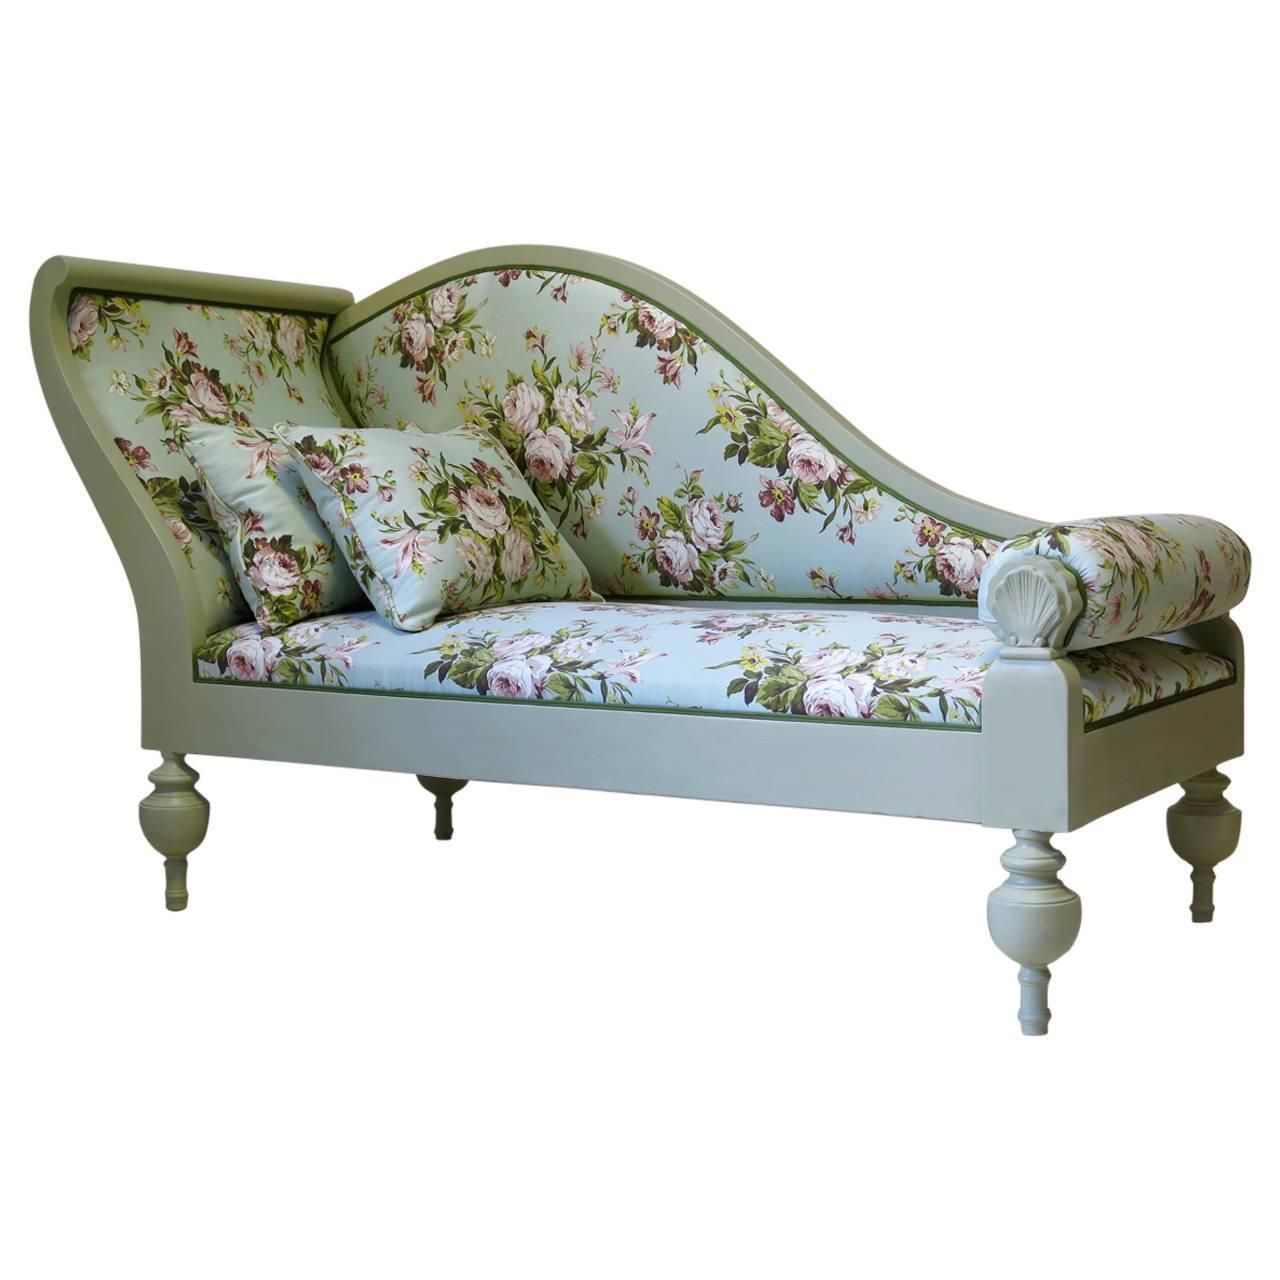 French Baroque Style Chintz Upholstered Daybed, Circa Intended For Chintz Sofas (View 3 of 15)